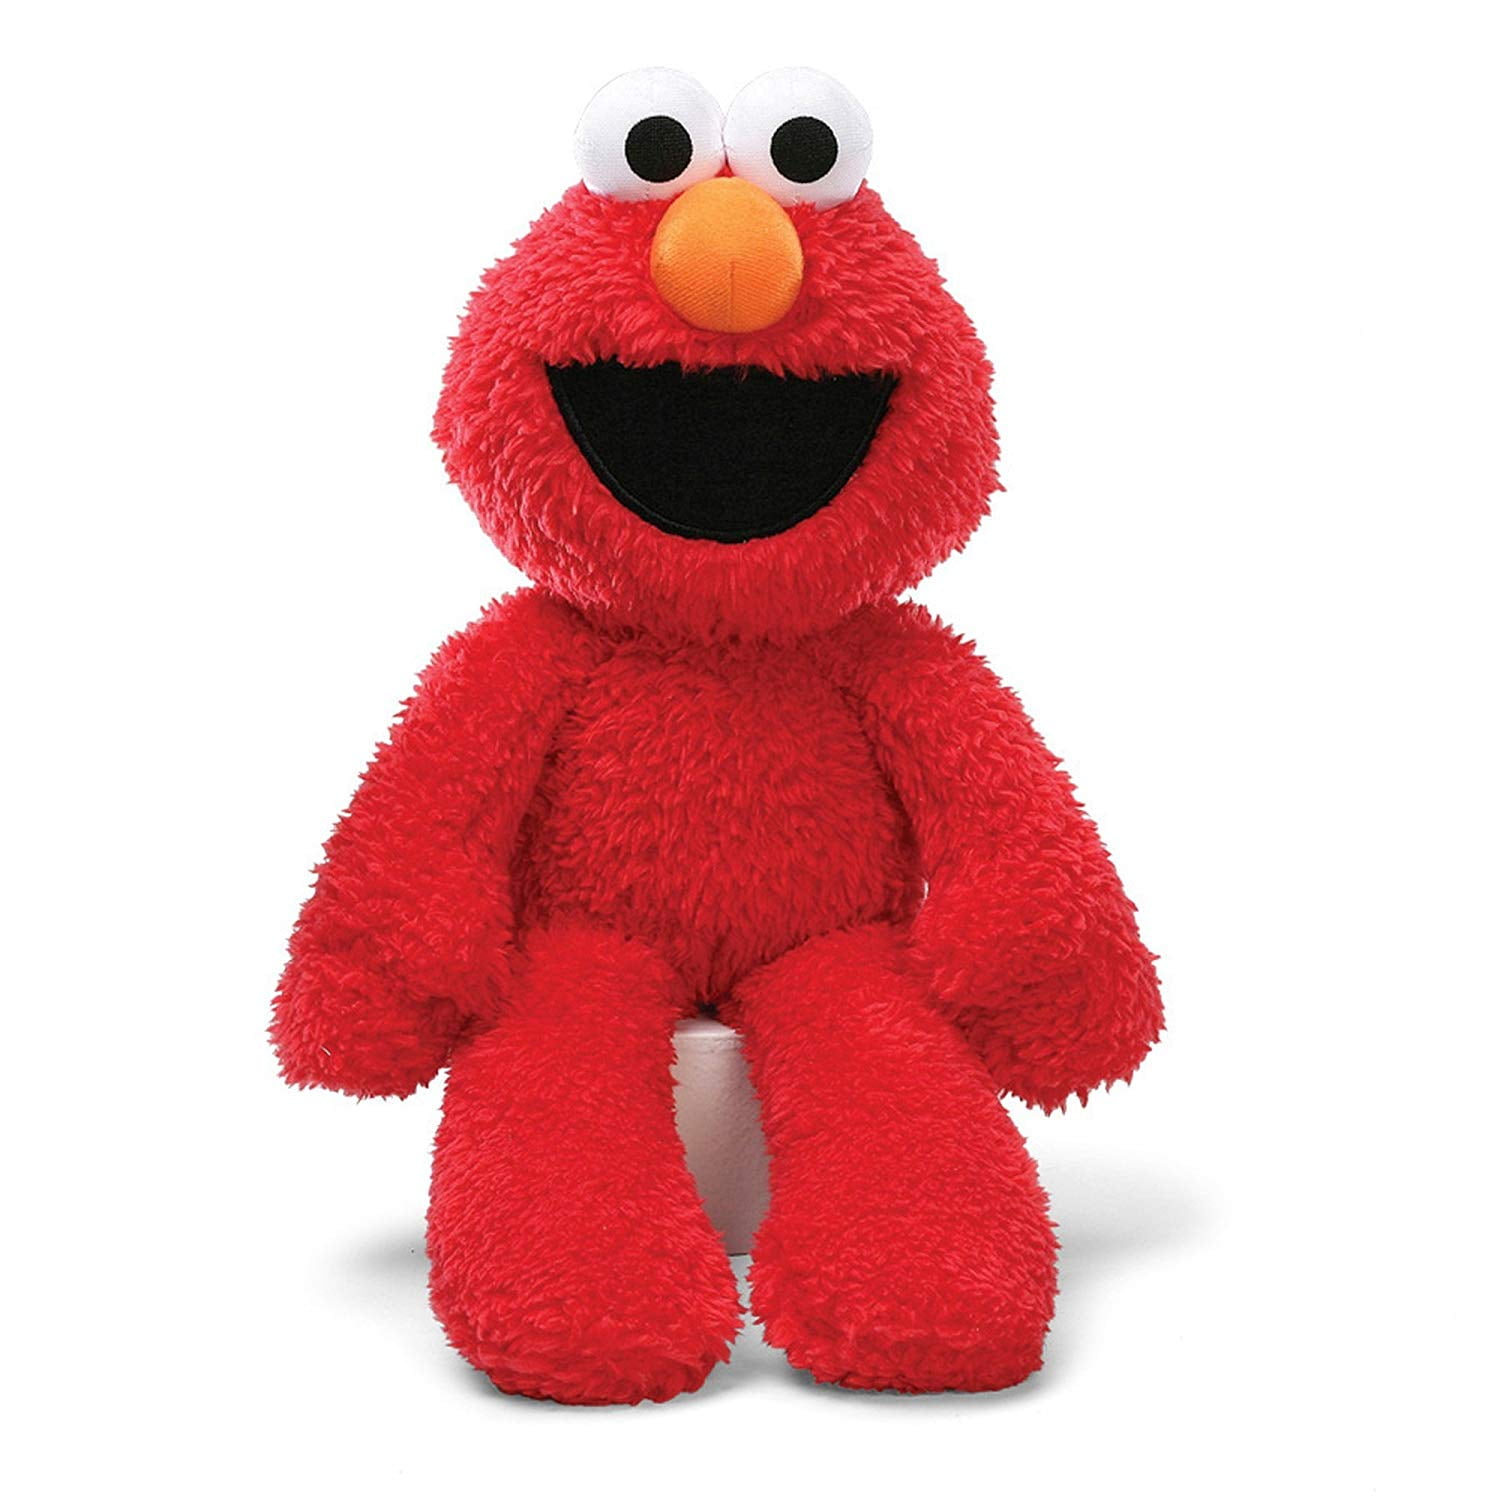 Weighted stuffed animal small Elmo washable weighted buddy 2 lbs